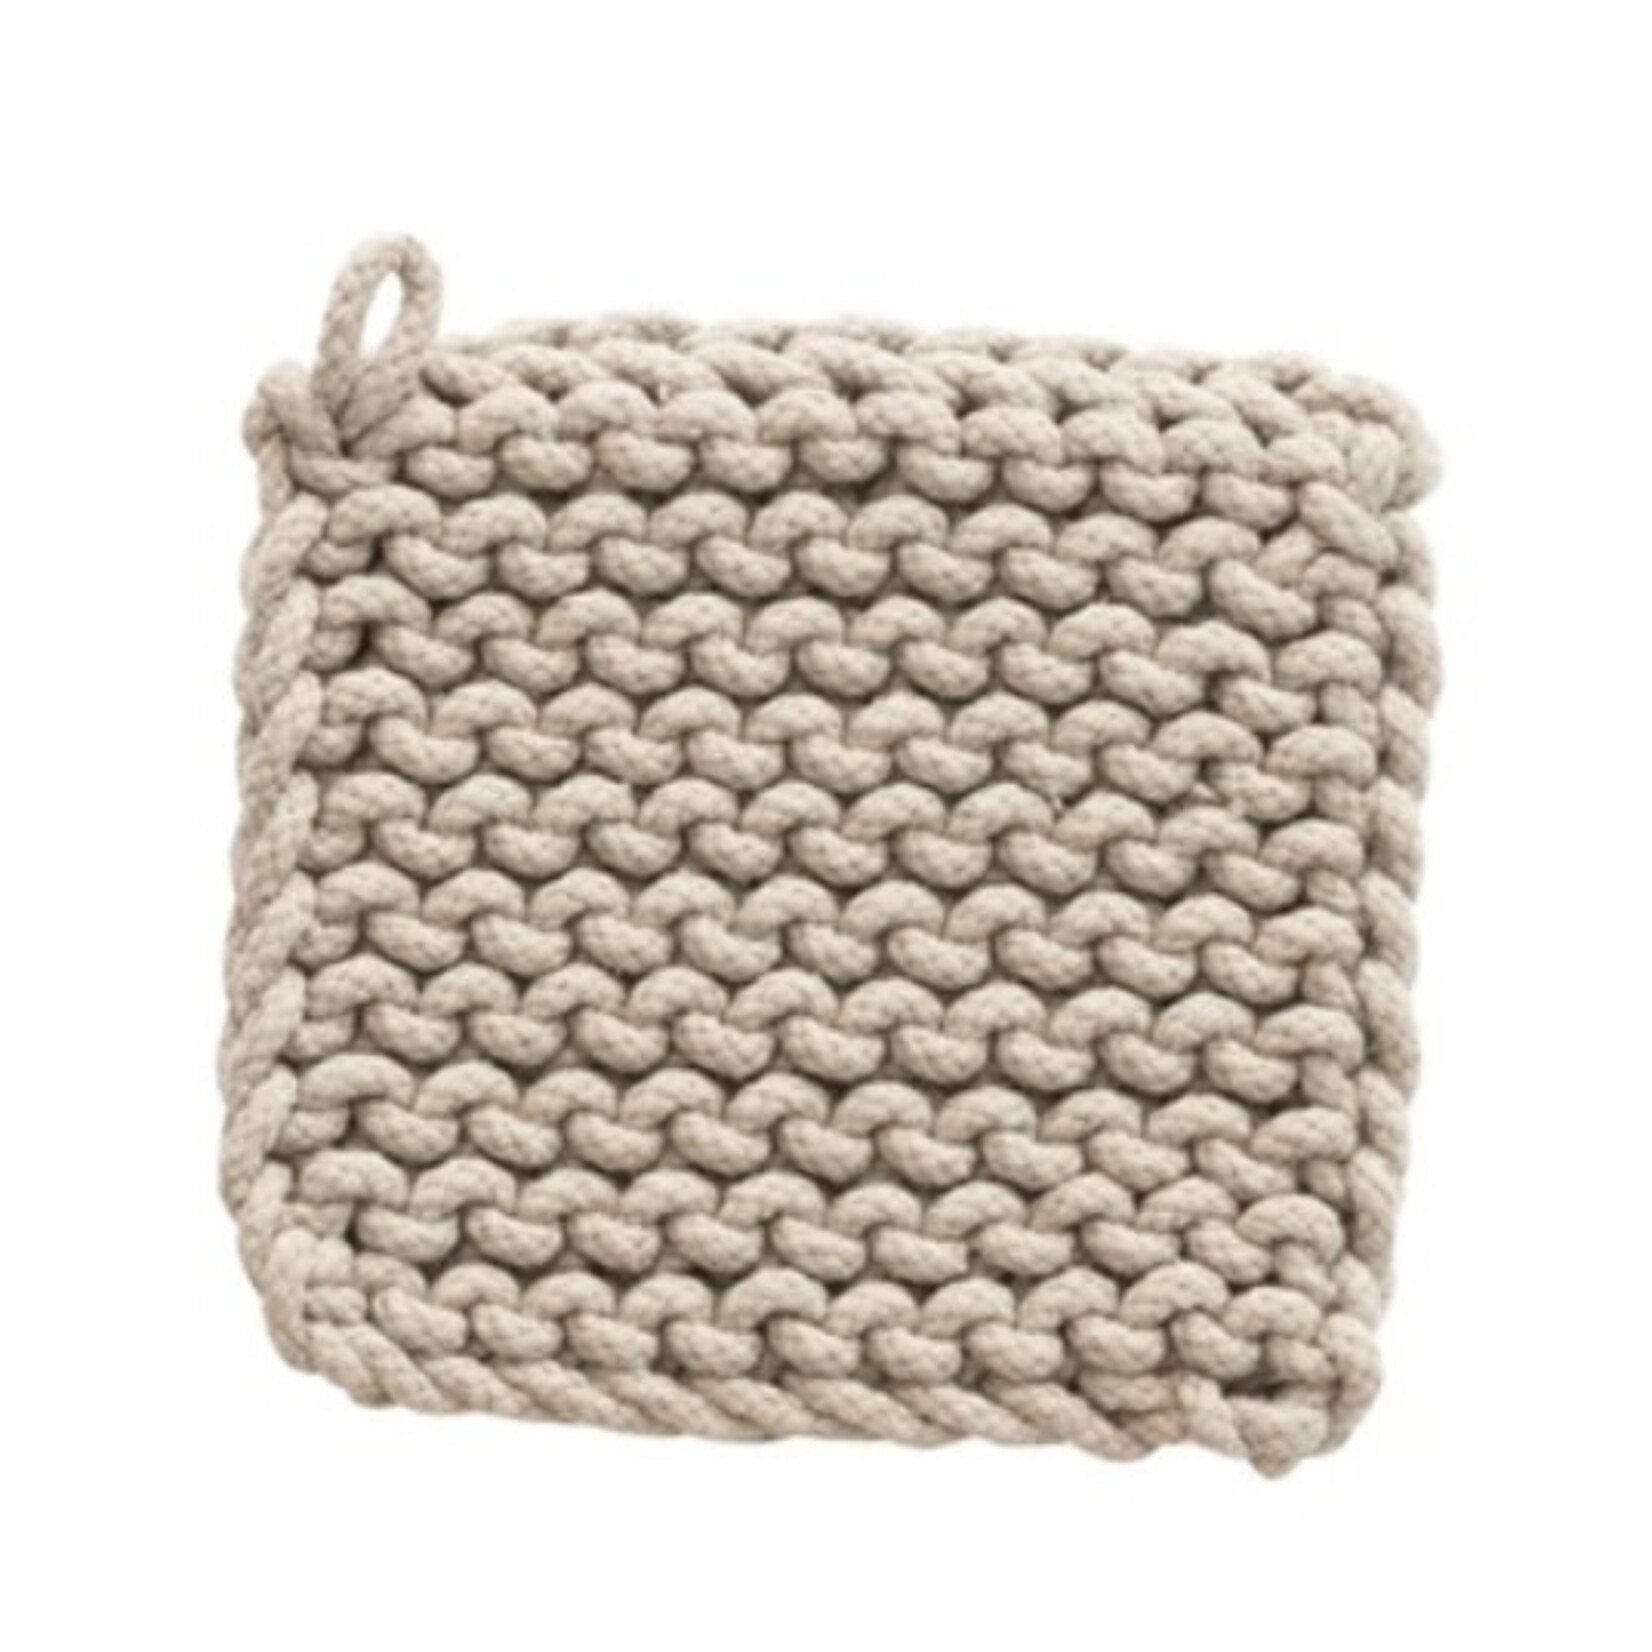 Creative Co-op Square Cotton Crocheted Pot Holder